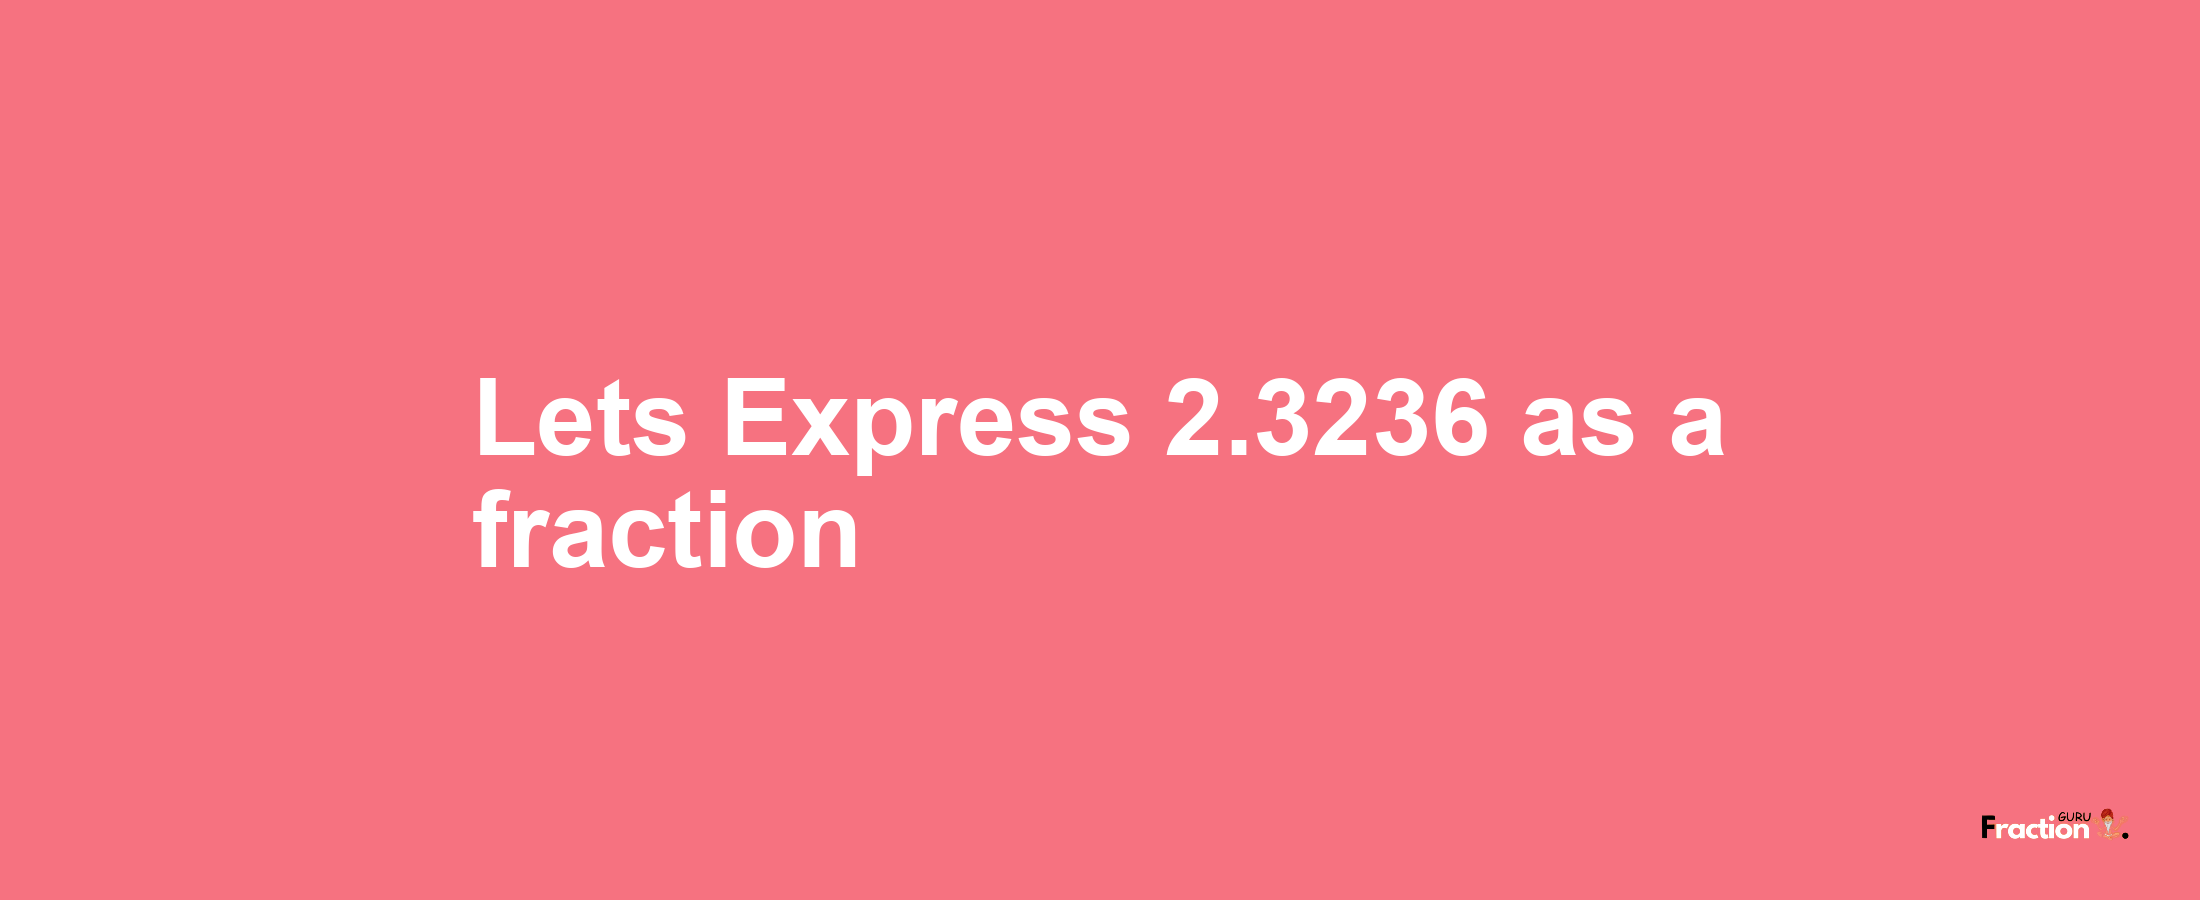 Lets Express 2.3236 as afraction